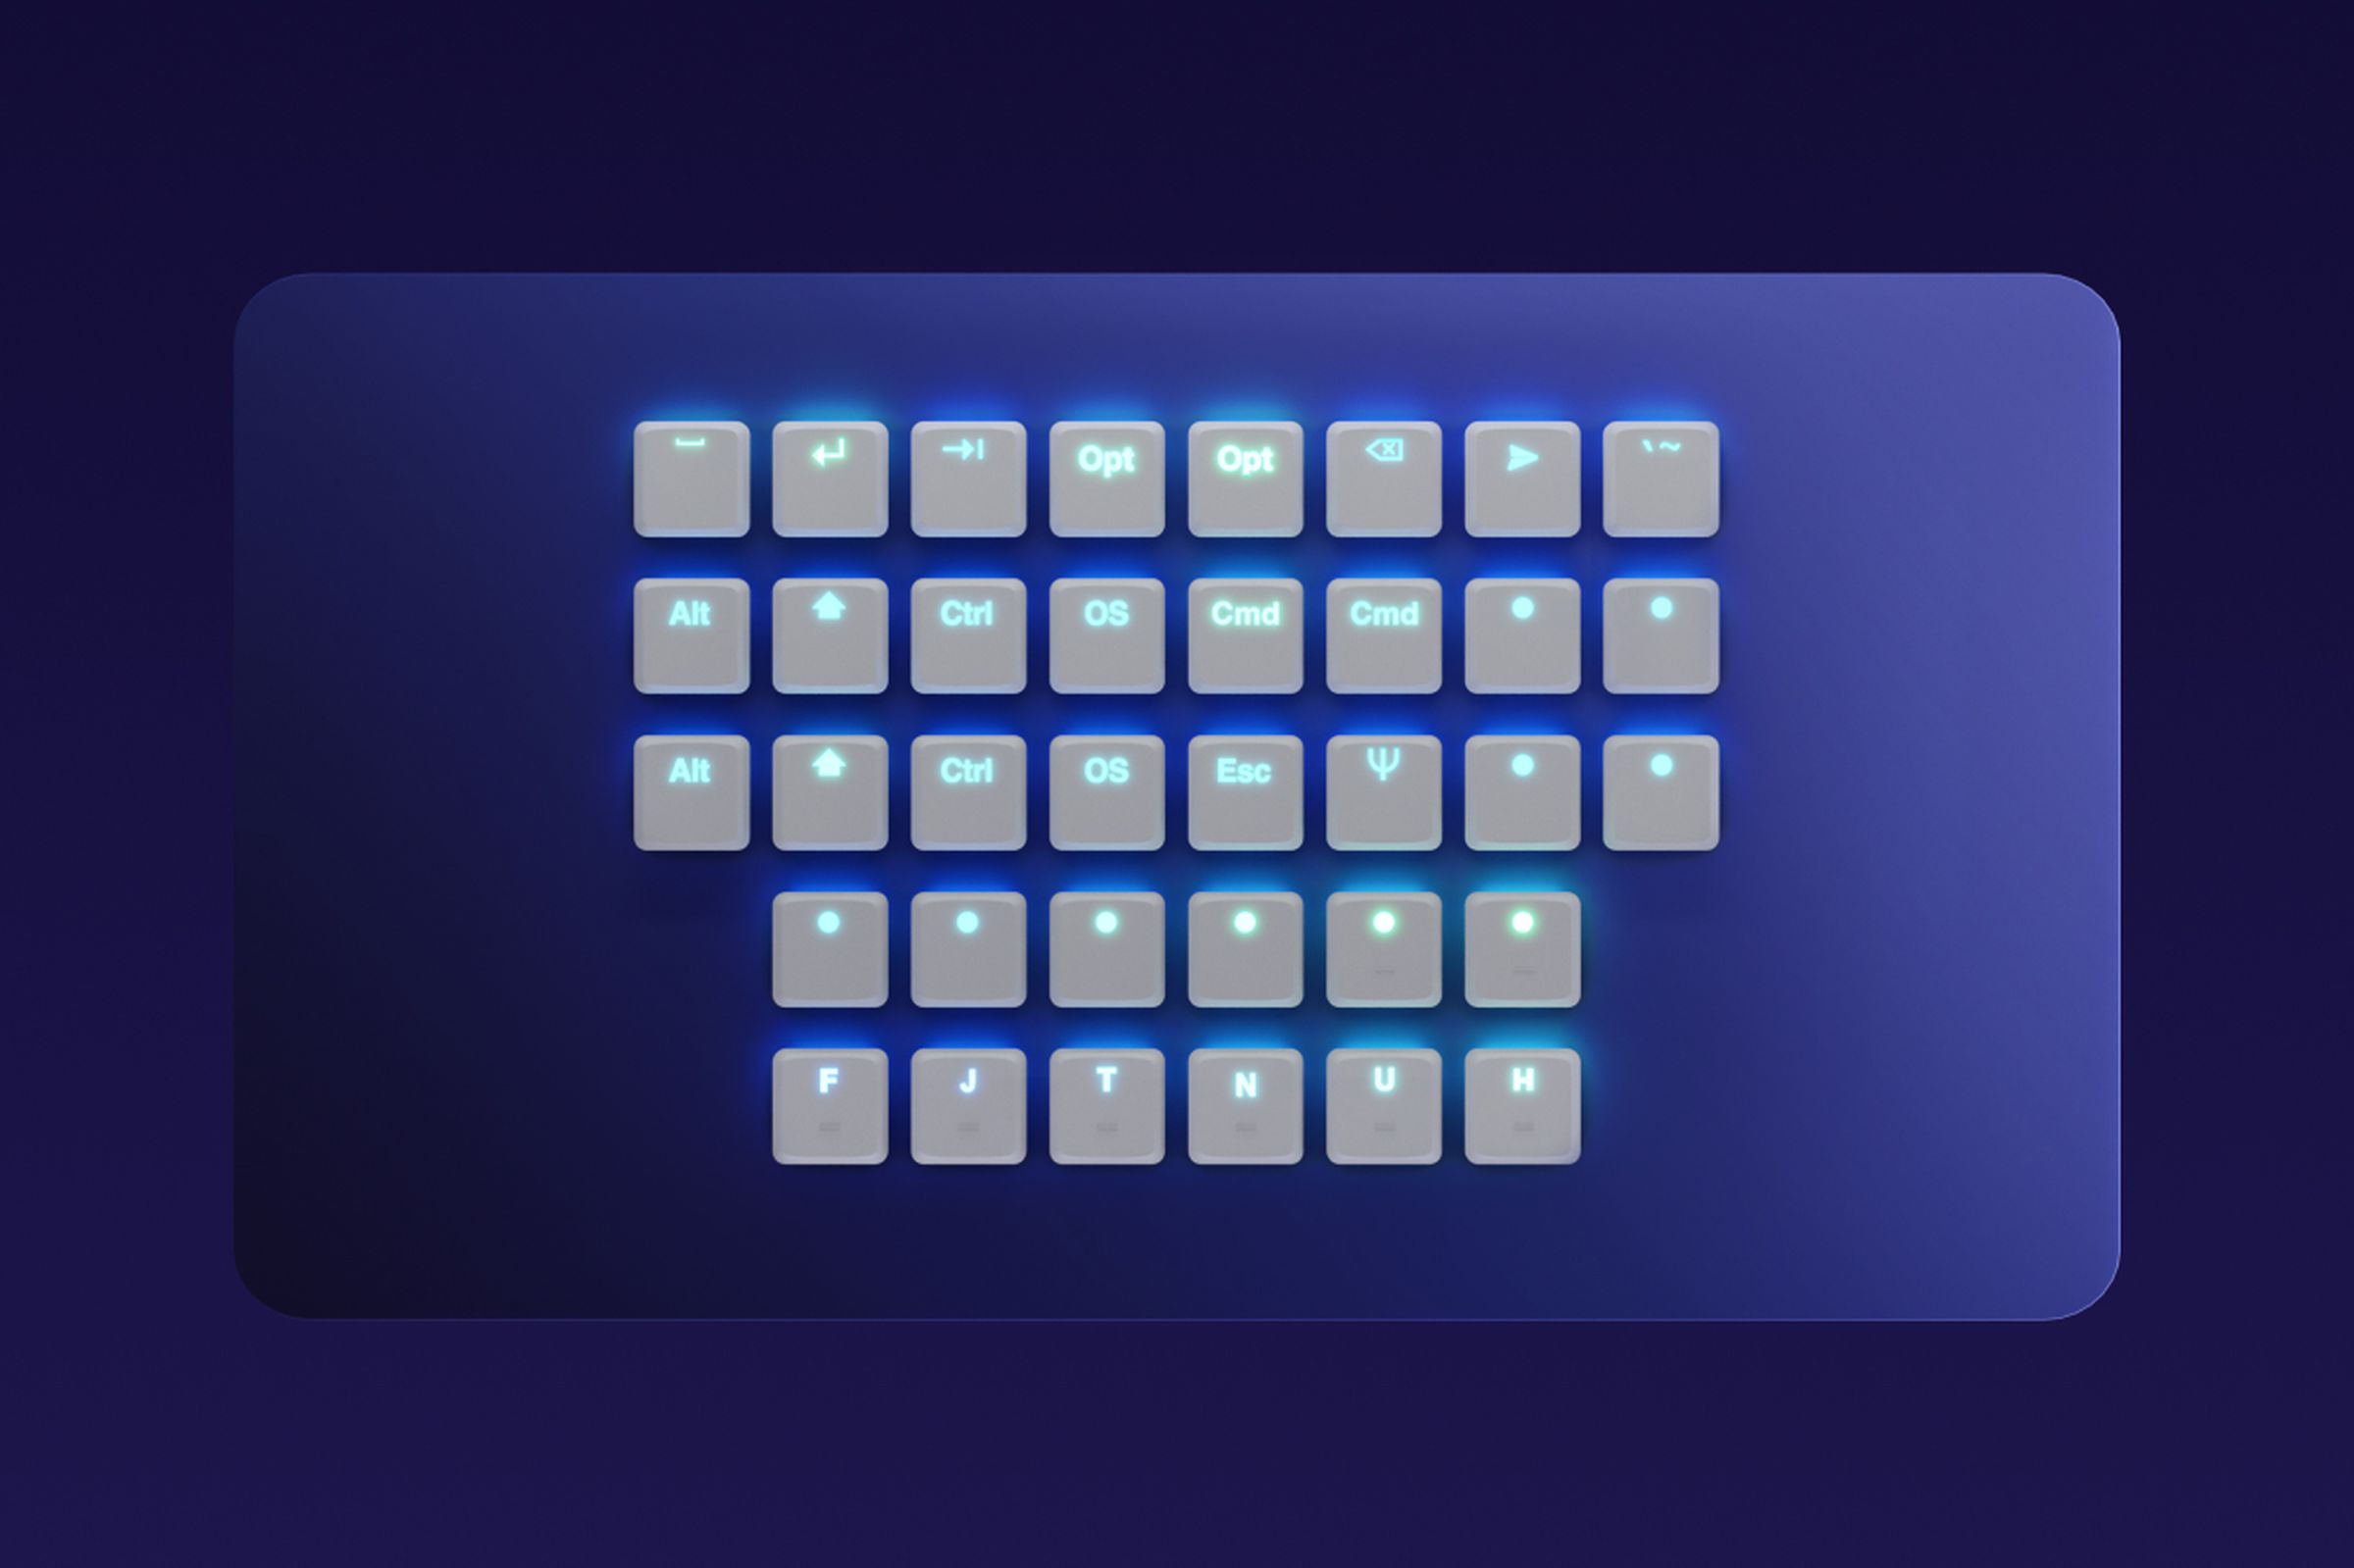 <em>All Voyager kits come with these 36 additional keycaps for some customization.</em>